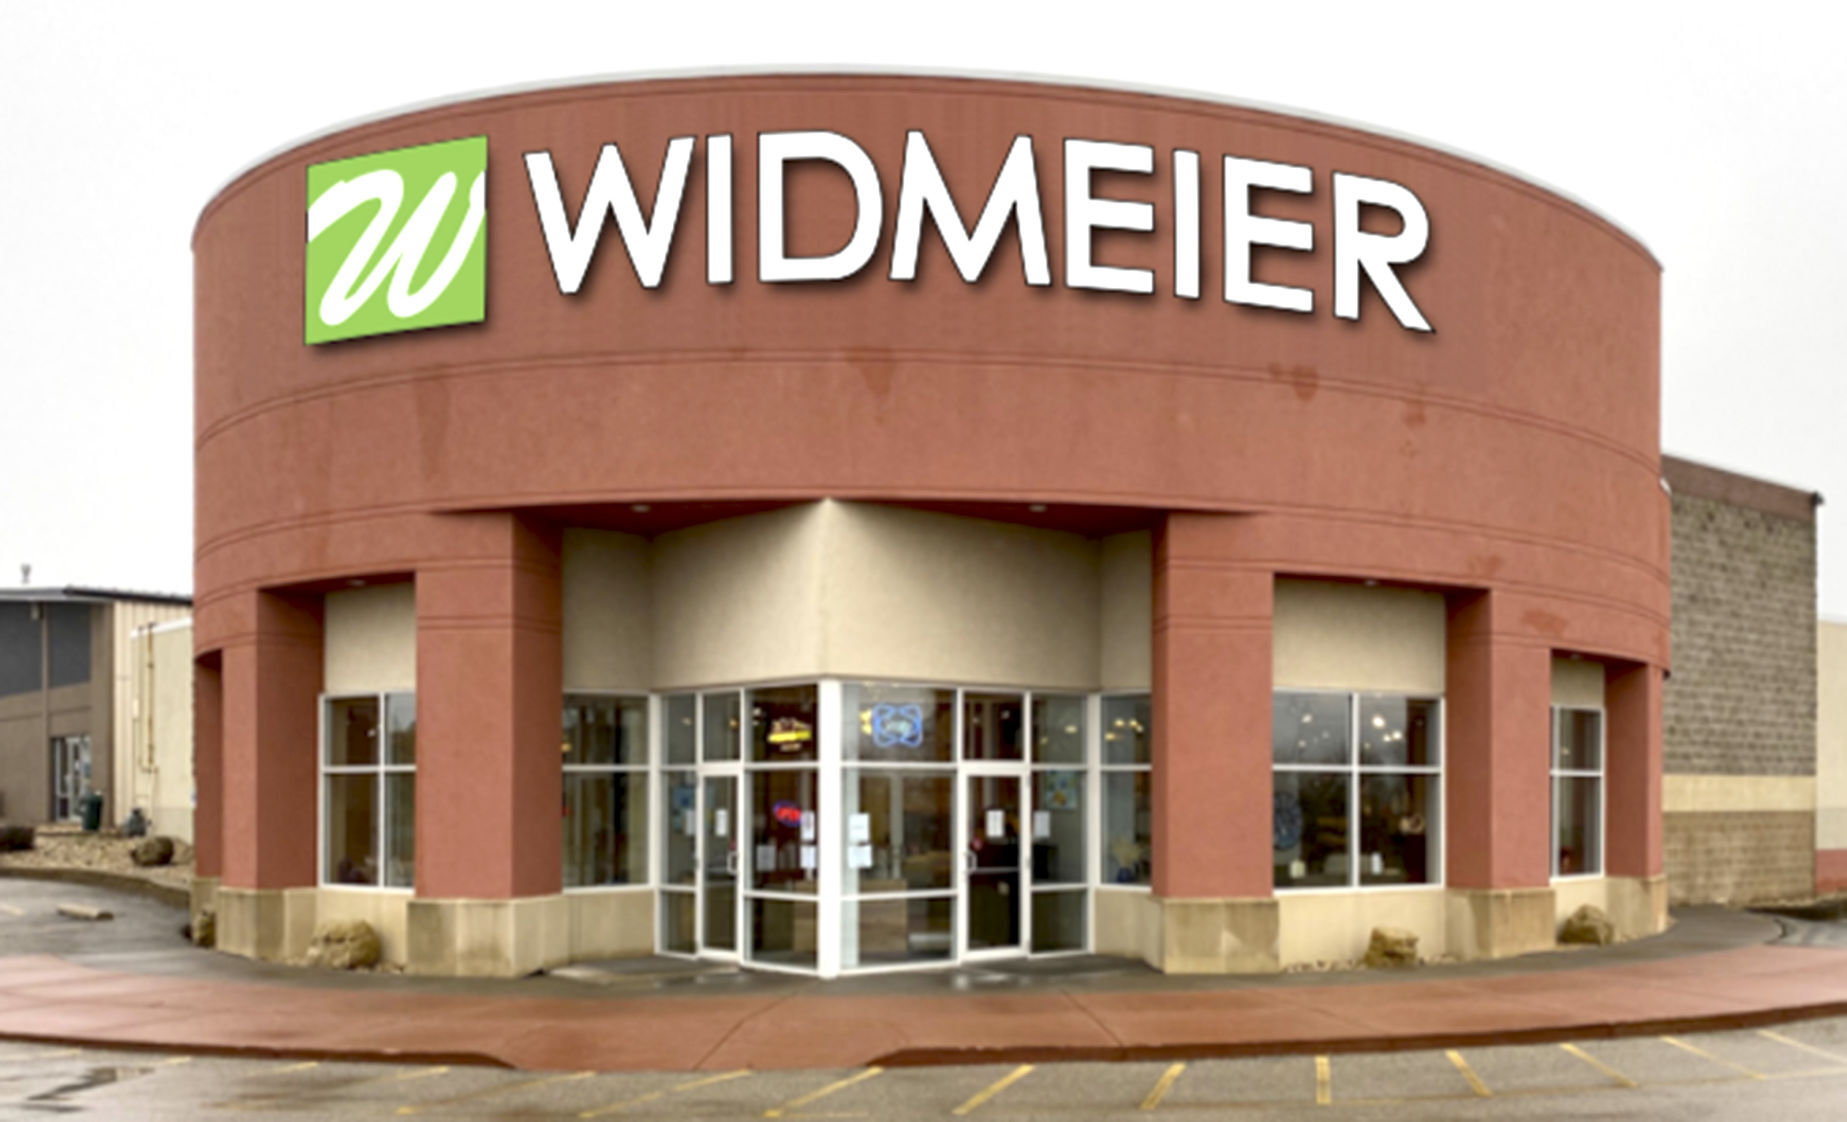 Rendering of the new location for Widmeier Flooring in Dubuque. PHOTO CREDIT: Contributed